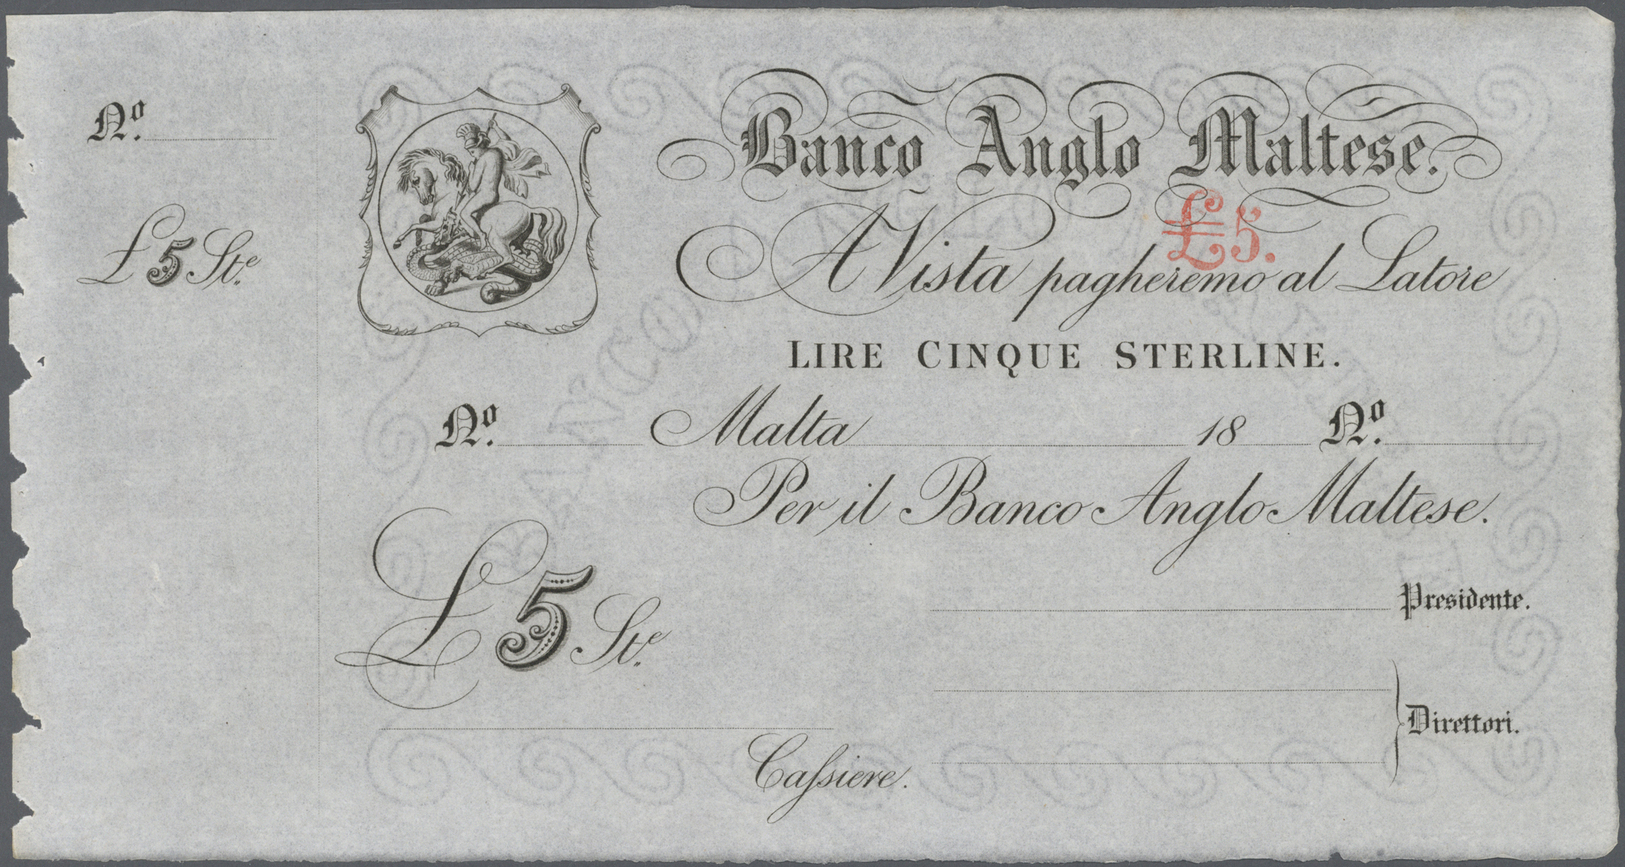 01675 Malta: Banco Anglo Maltese 5 Pounds 18xx Remainder Without Date, Serial And Signature, P.S112r, Very Rare And Seld - Malta